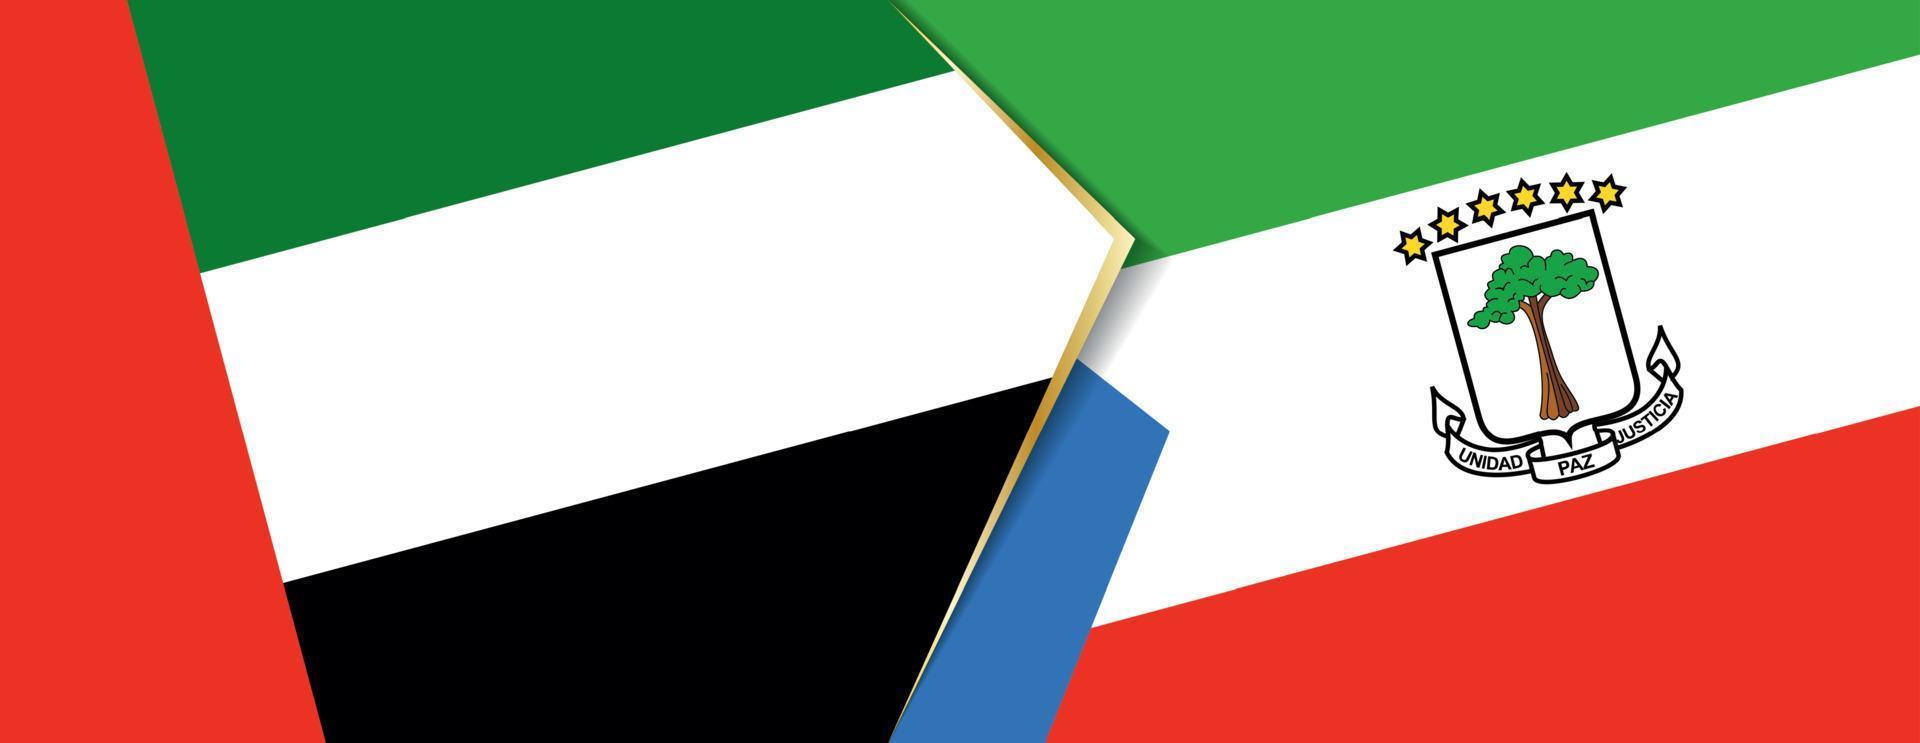 United Arab Emirates and Equatorial Guinea flags, two vector flags.